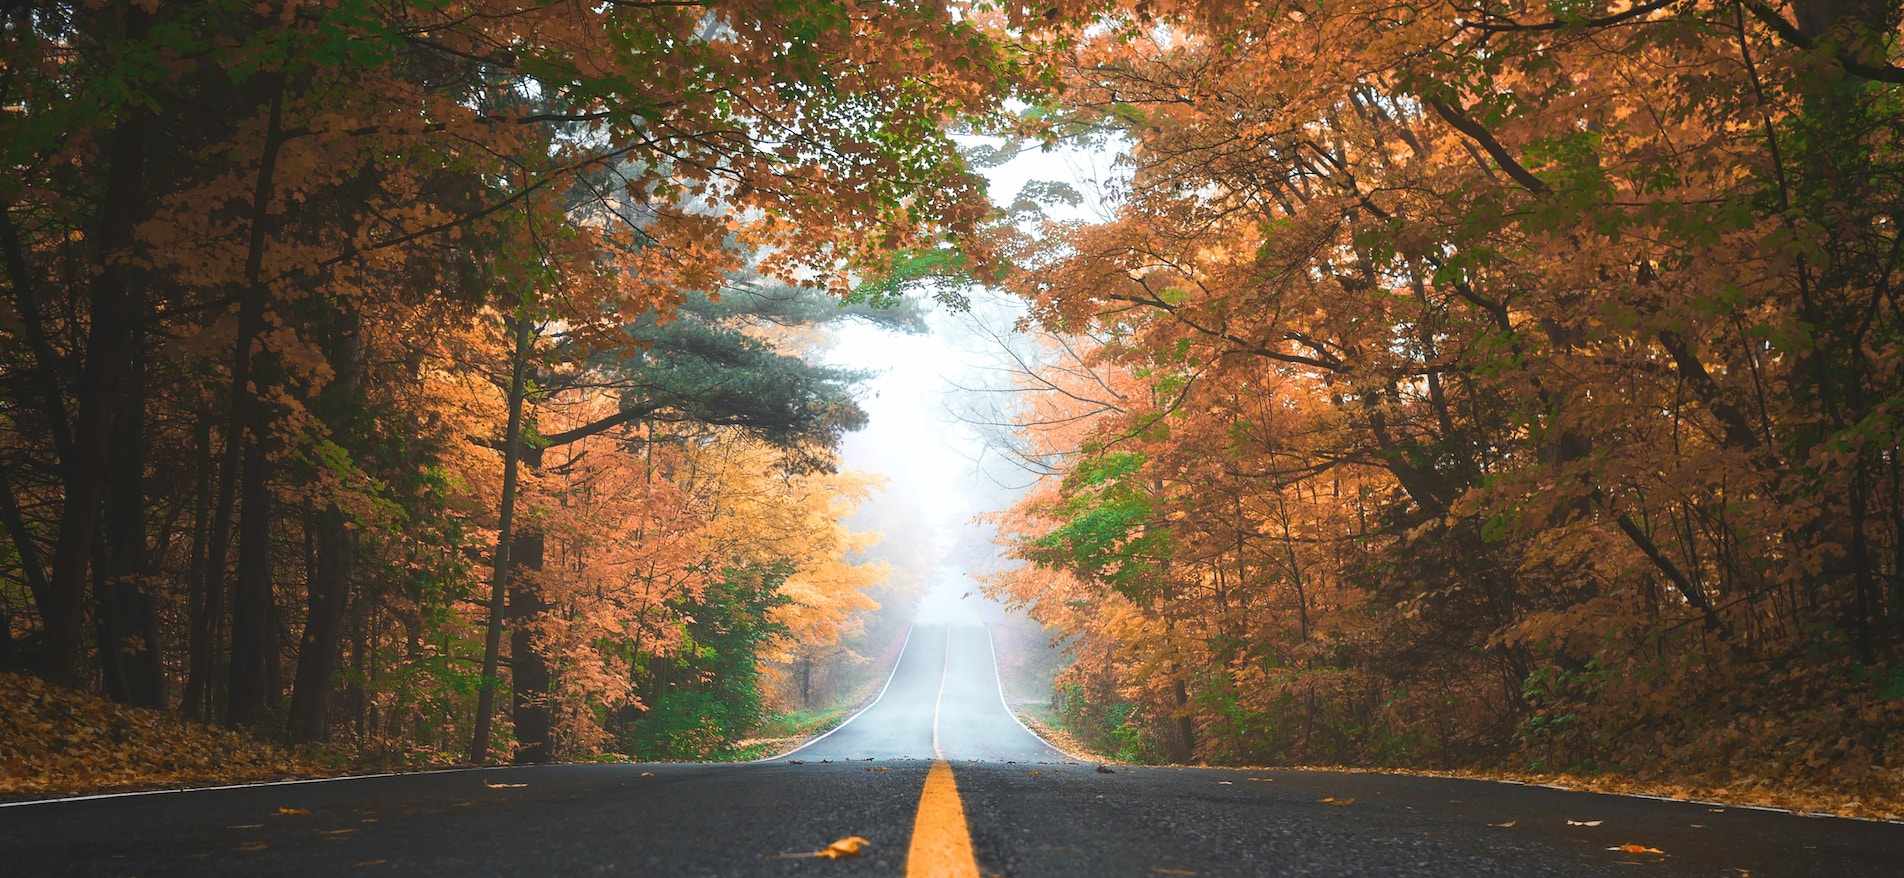 The Best Road Trips to Catch Fall Foliage